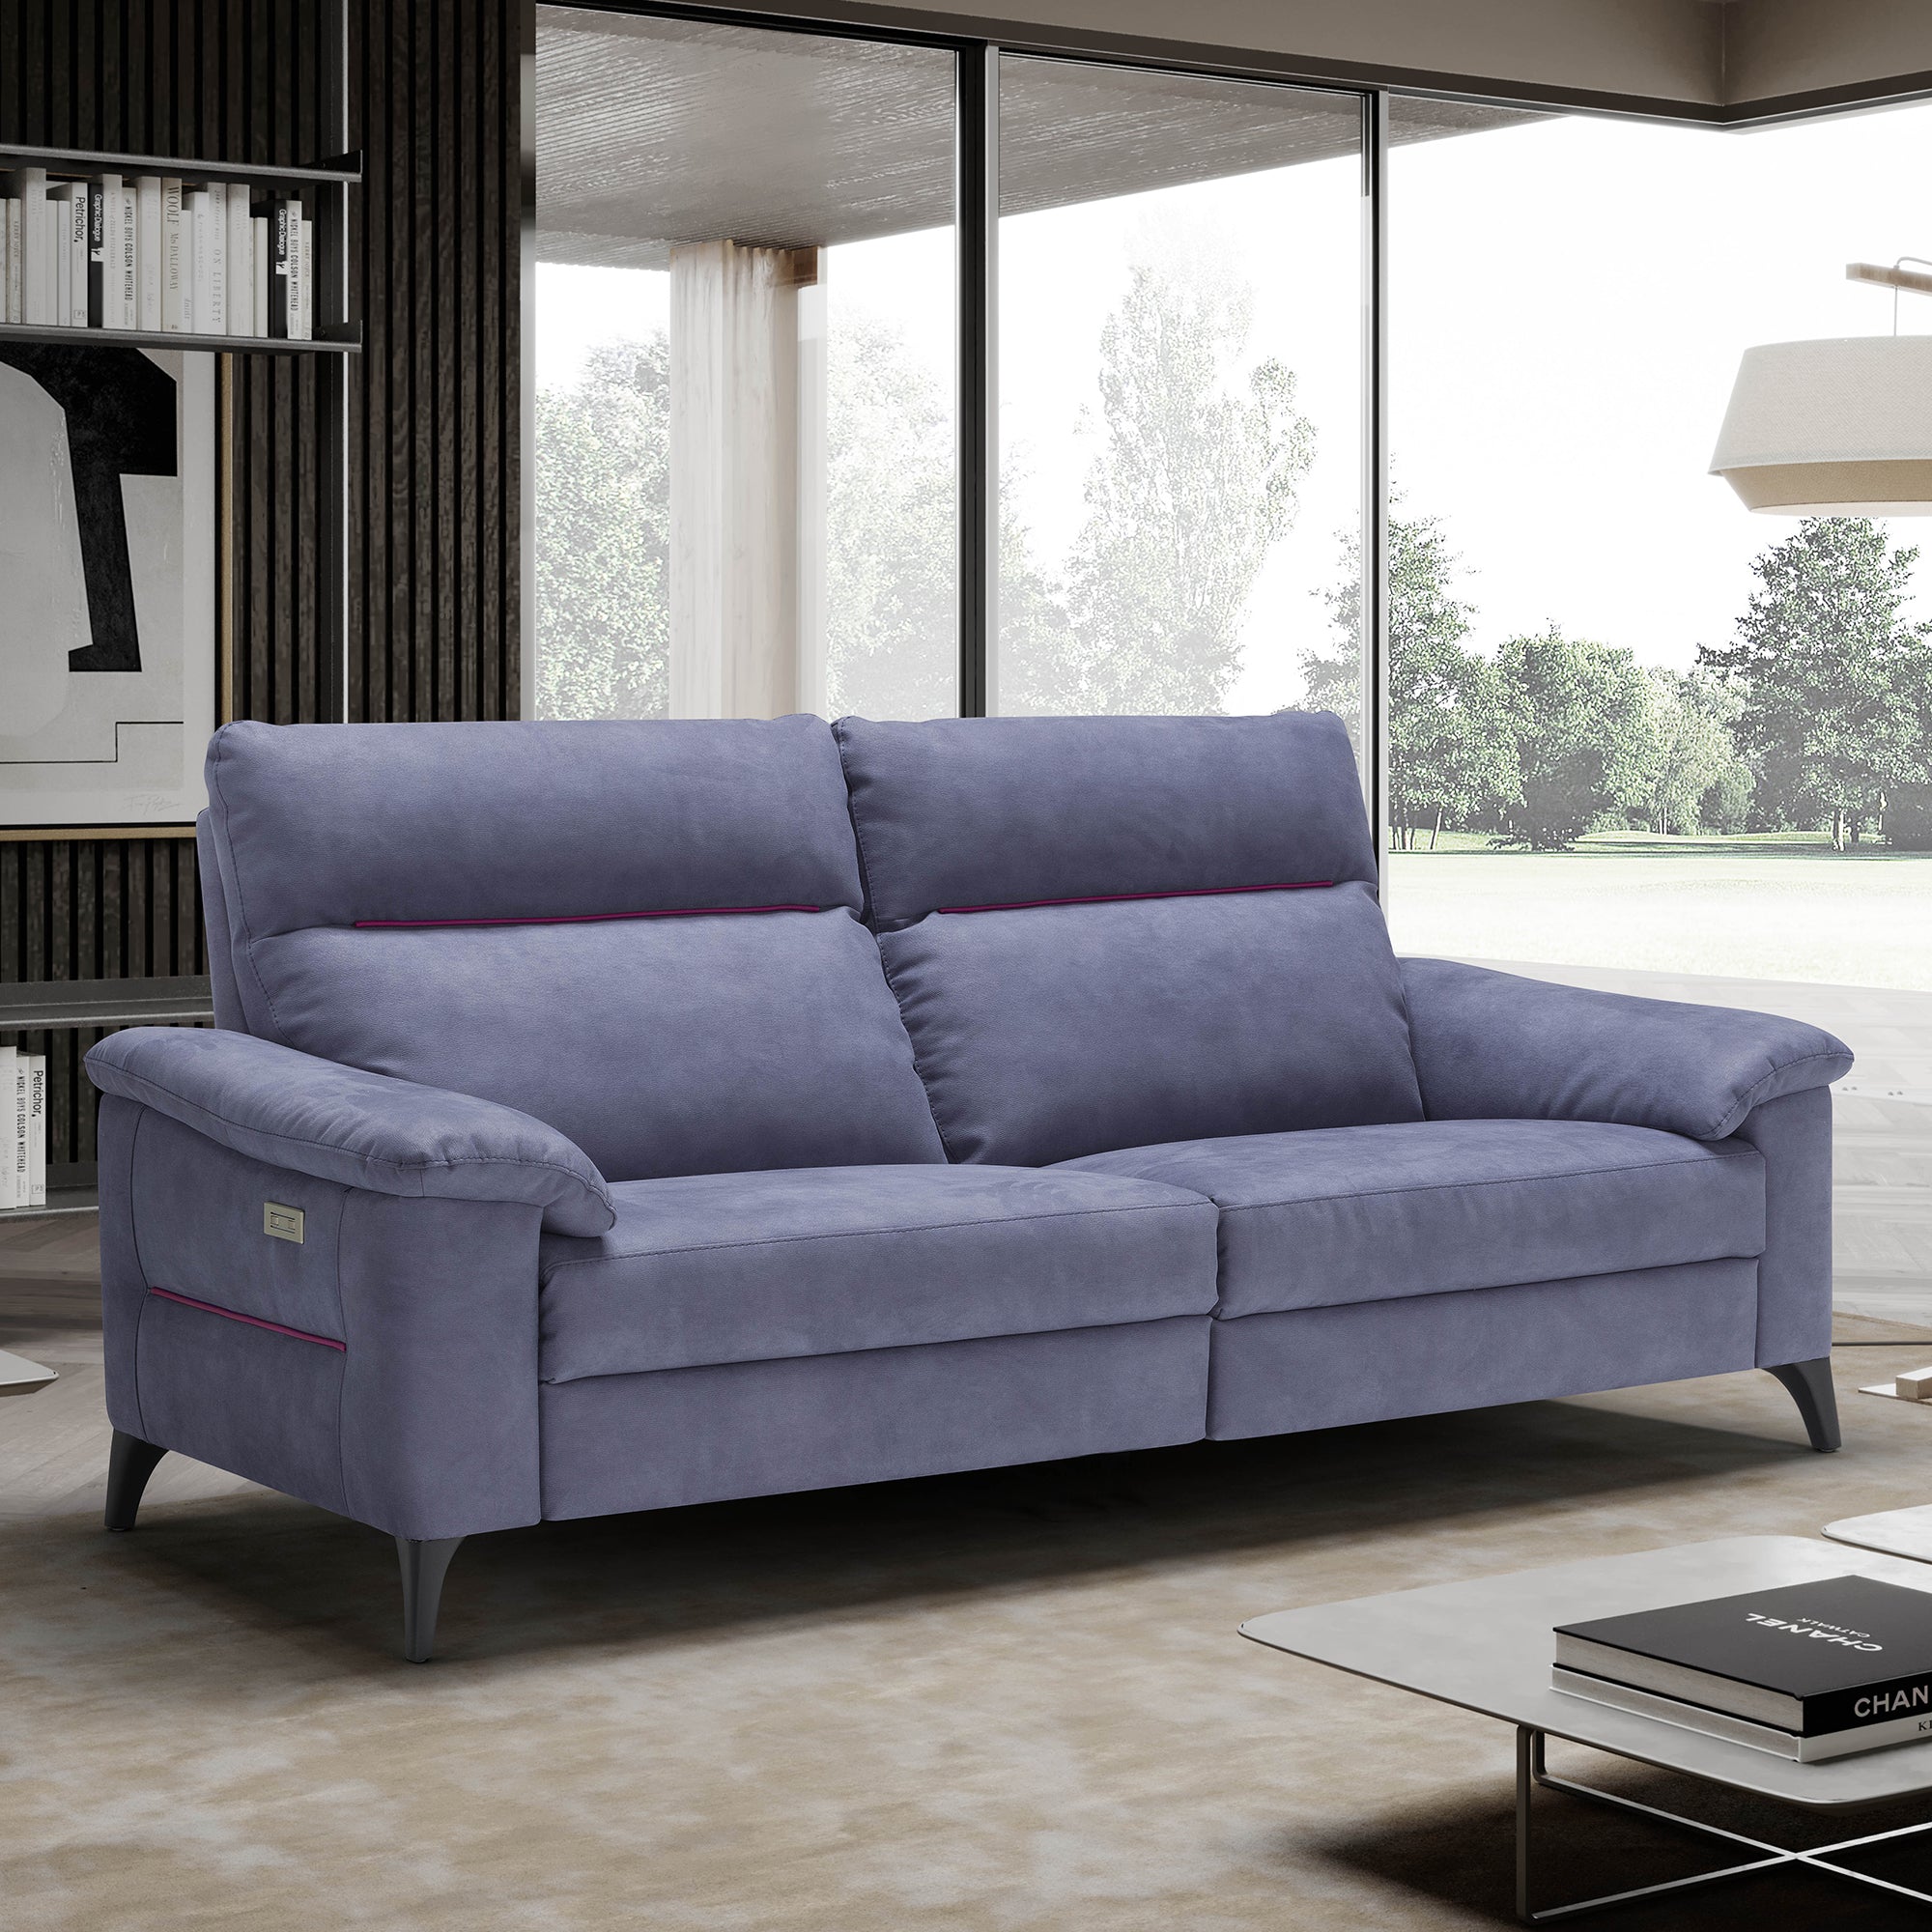 Treviso - 2 Seat Sofa In Fabric Or Leather Microfibre